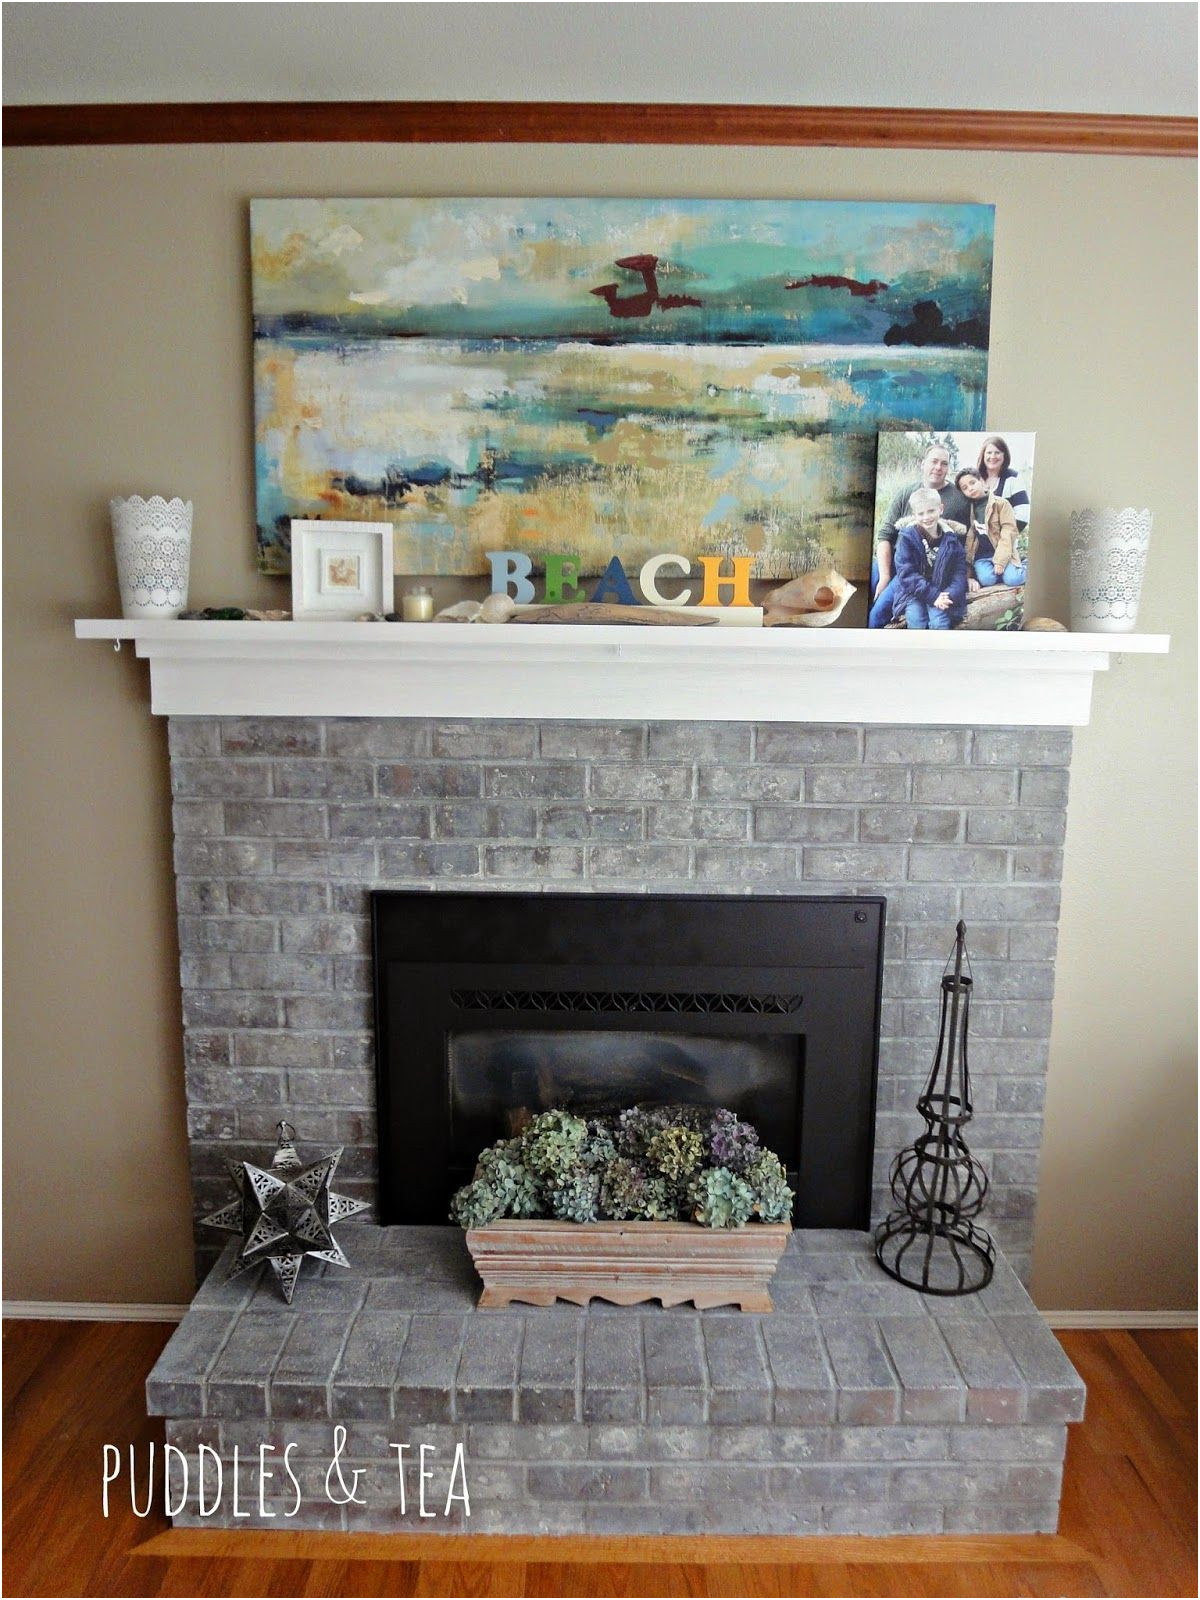 Awesome Remodeling Brick Fireplace